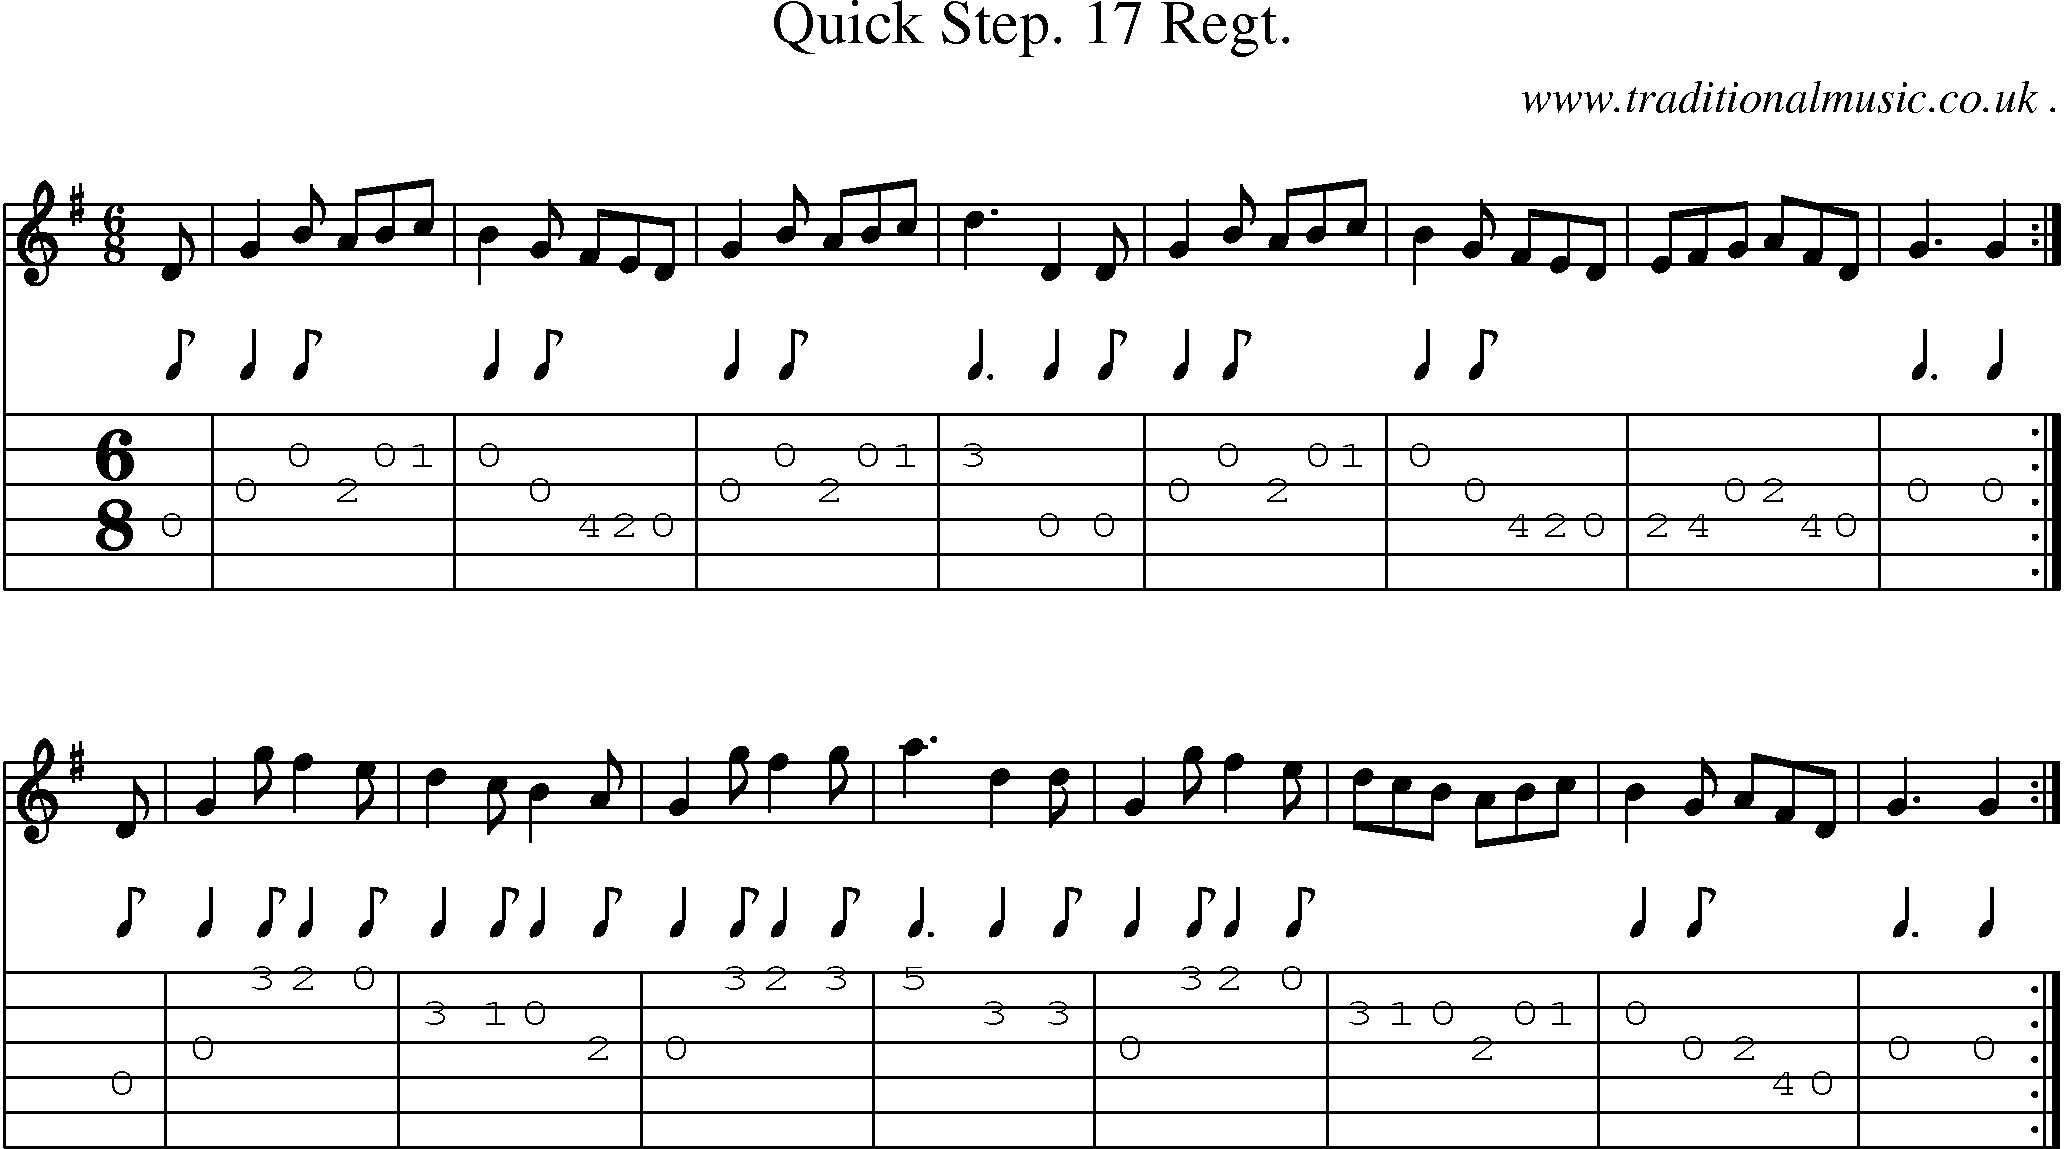 Sheet-Music and Guitar Tabs for Quick Step 17 Regt